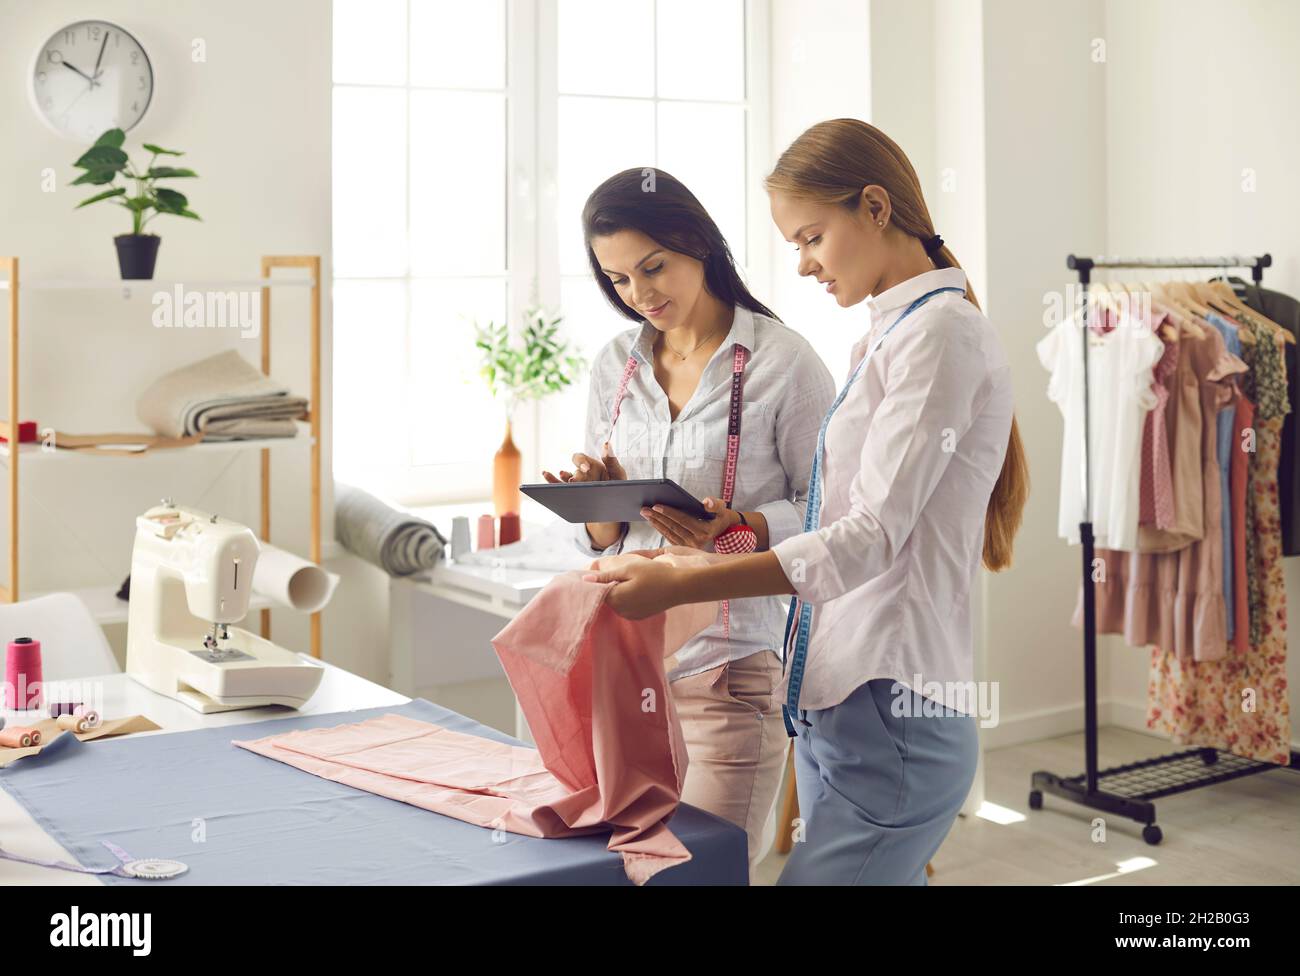 Two female atelier owners check catalog with new fabric samples on digital tablet. Stock Photo